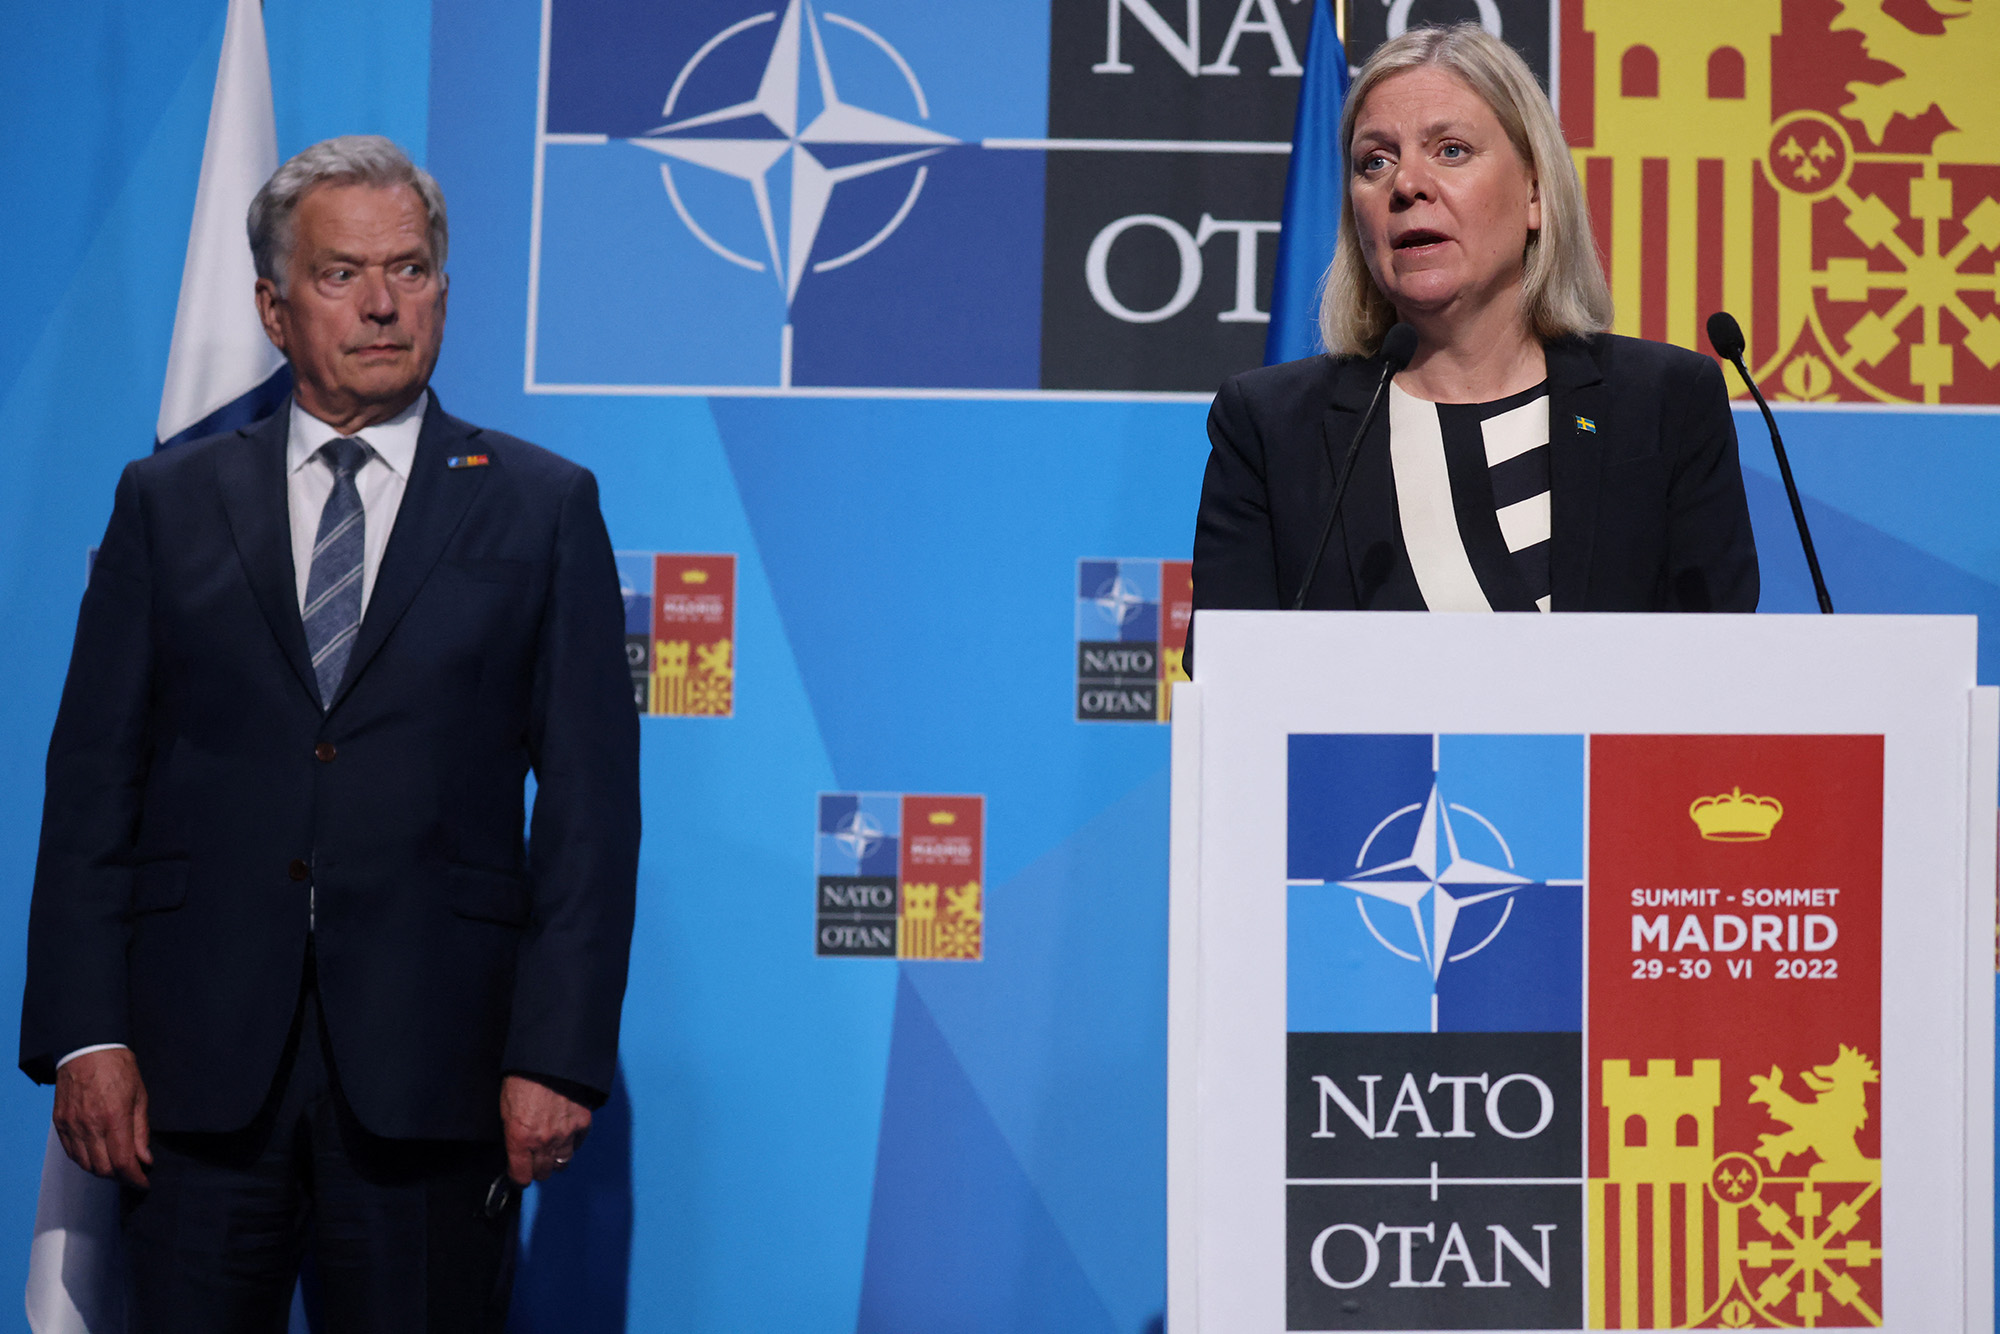 Sweden's Prime Minister Magdalena Andersson speaks next to Finland's President Sauli Niinisto during a news conference at the NATO summit in Madrid, Spain, on June 29.